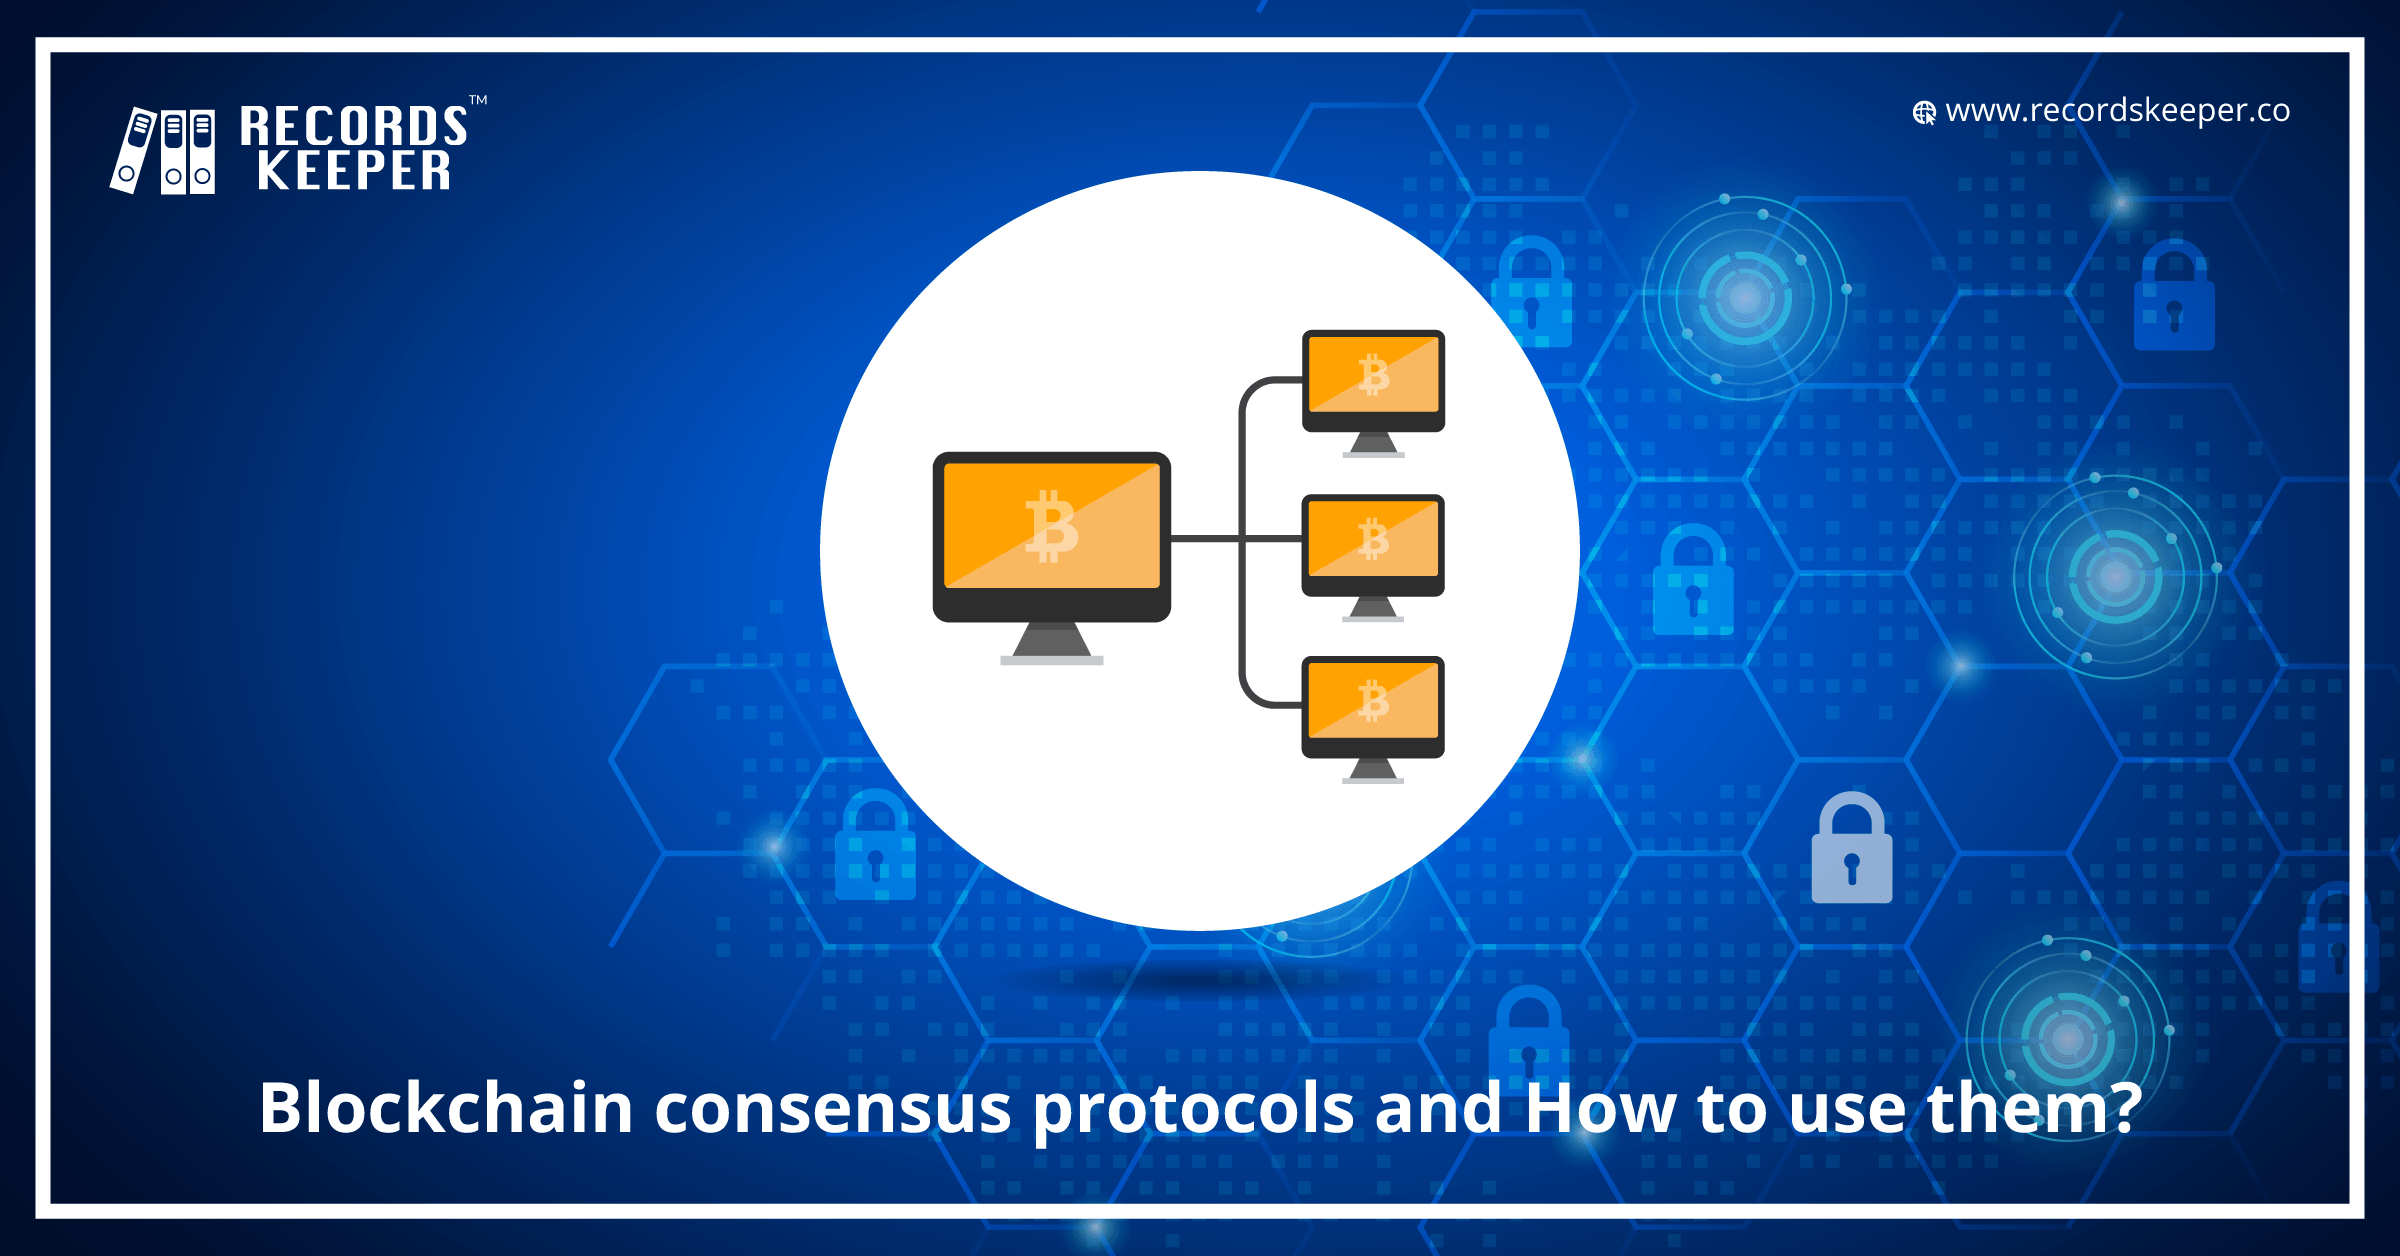 Blockchain consensus protocols and how to use them?